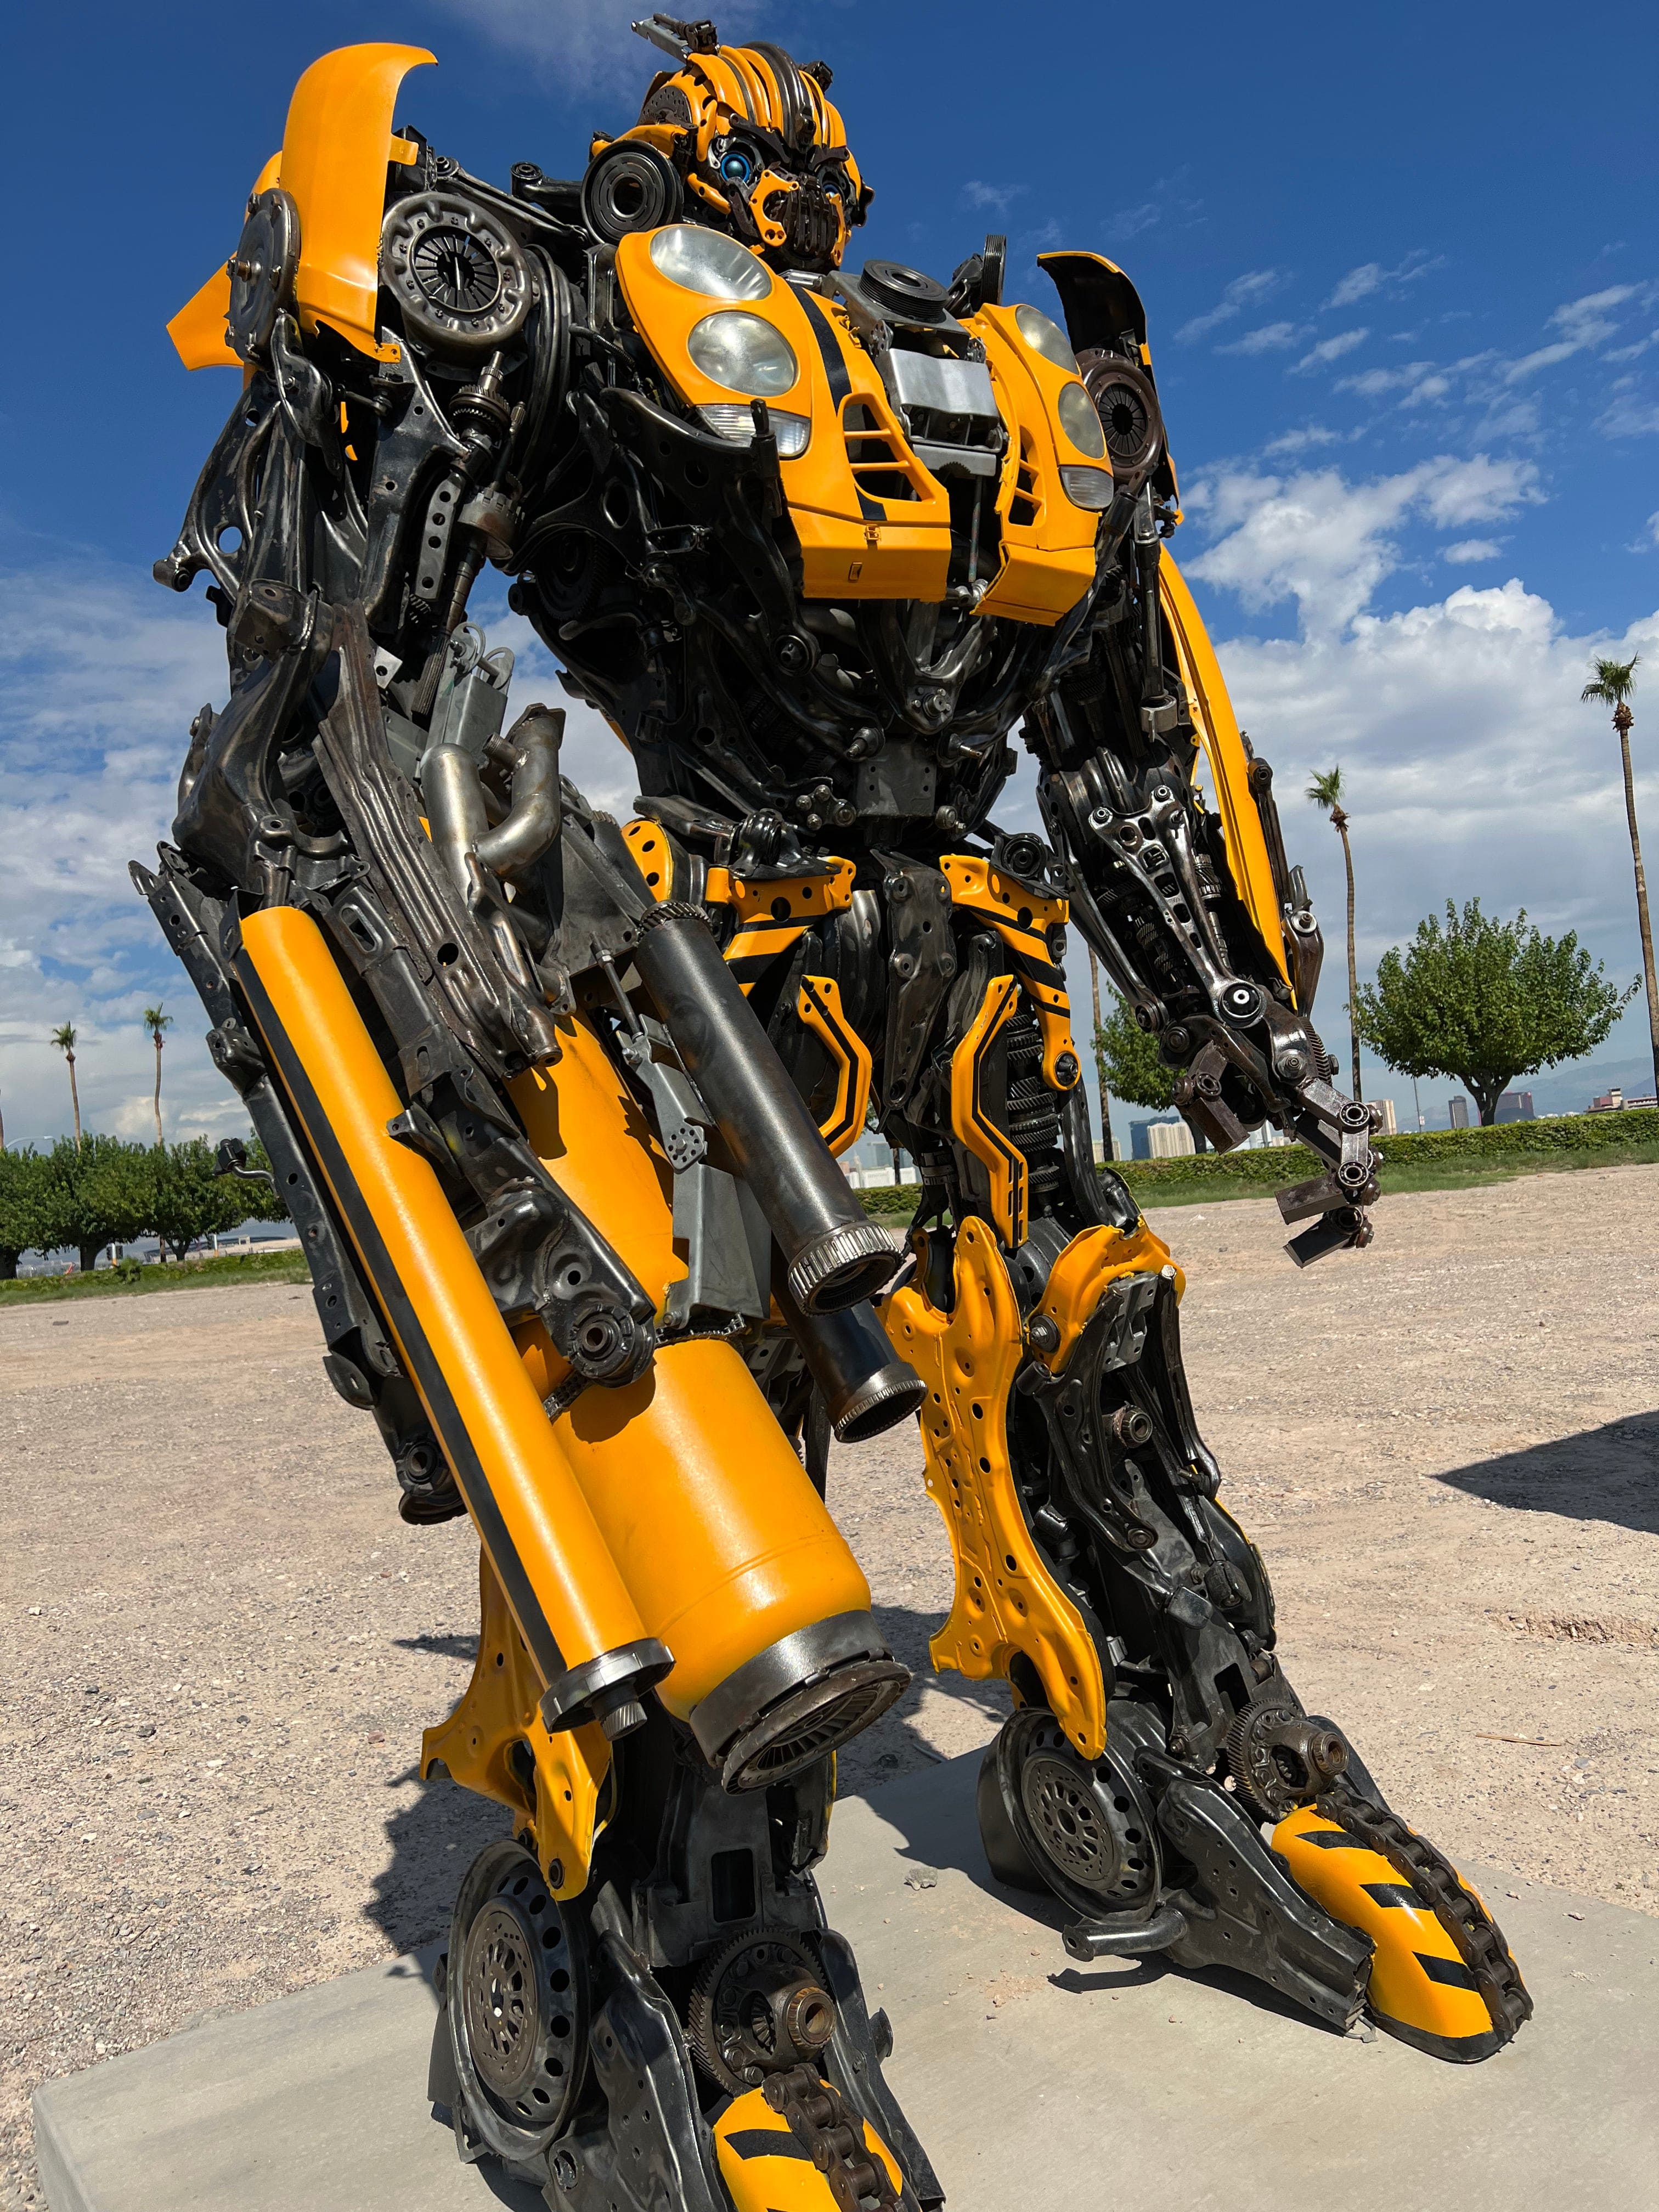 Kalifano Recycled Metal Art 11.5ft Bumblebee Inspired Recycled Metal Art Sculpture RMS-BB350-S01